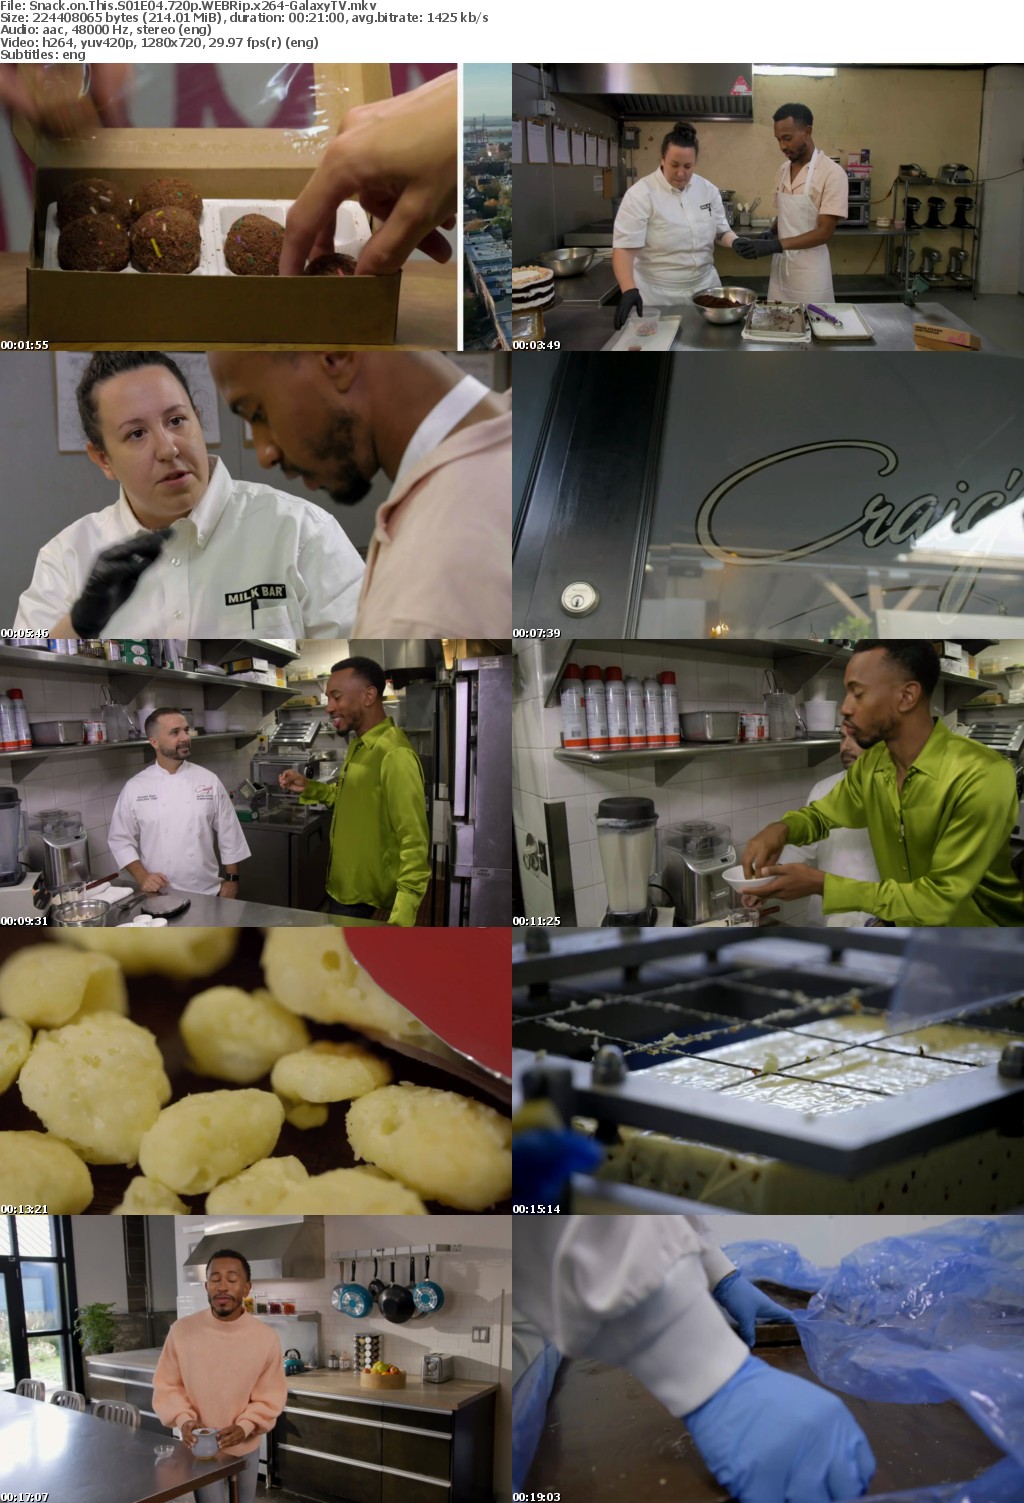 Snack on This S01 COMPLETE 720p WEBRip x264-GalaxyTV